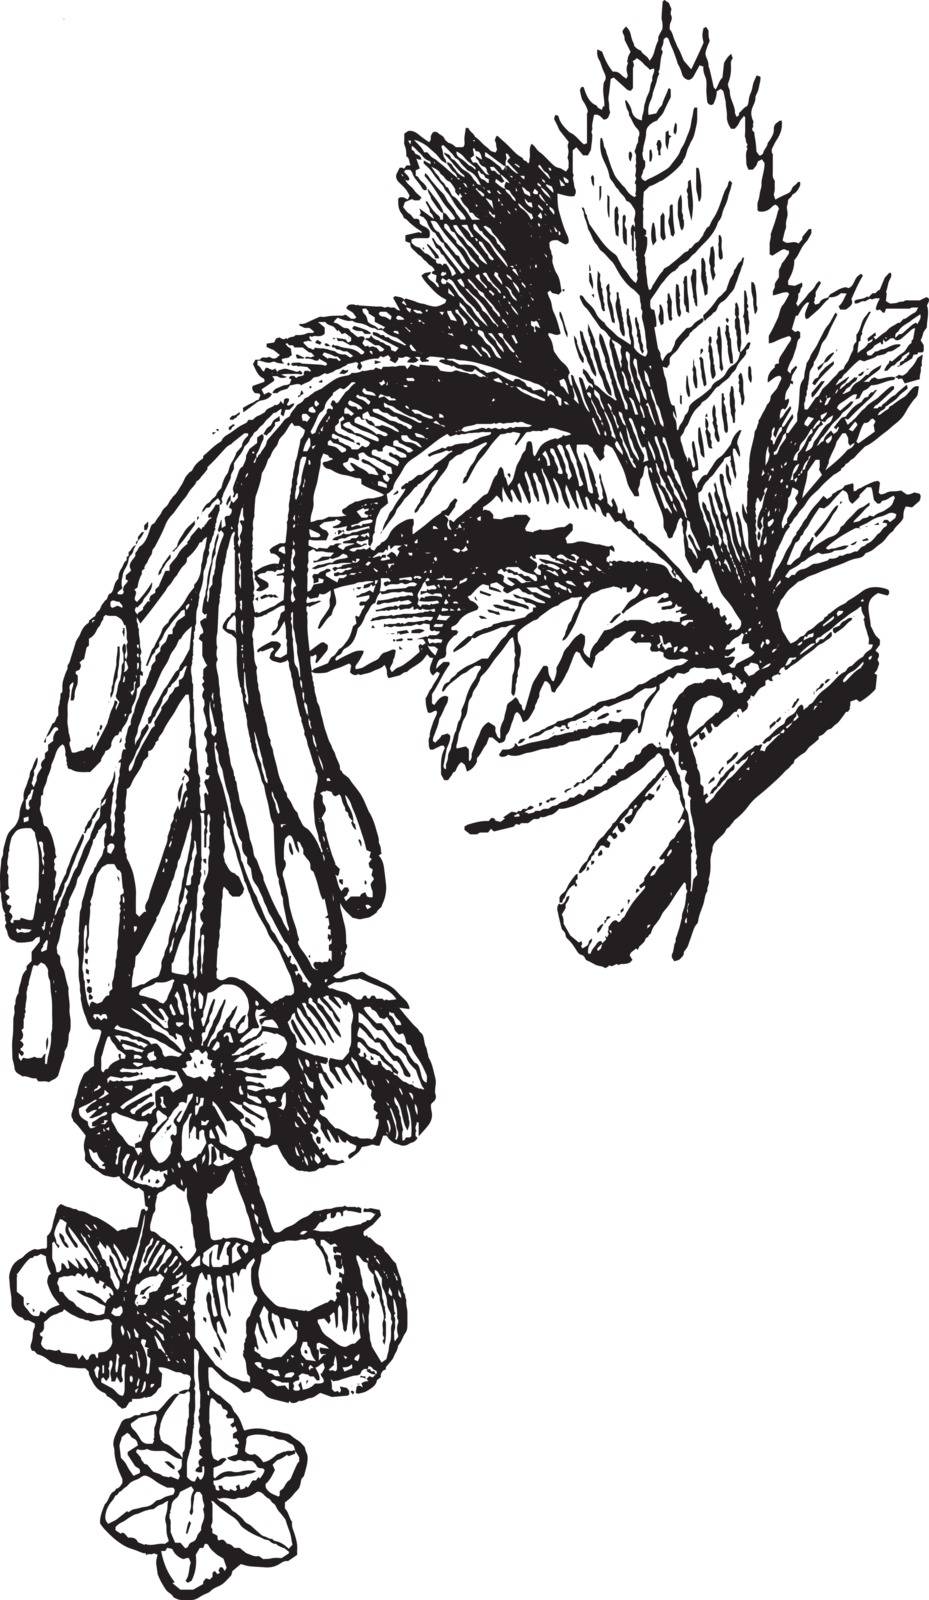 It is a flower plant consists of flower cluster with the separate flowers attached by short equal stalk at equal distances along a central stem, vintage line drawing or engraving illustration.